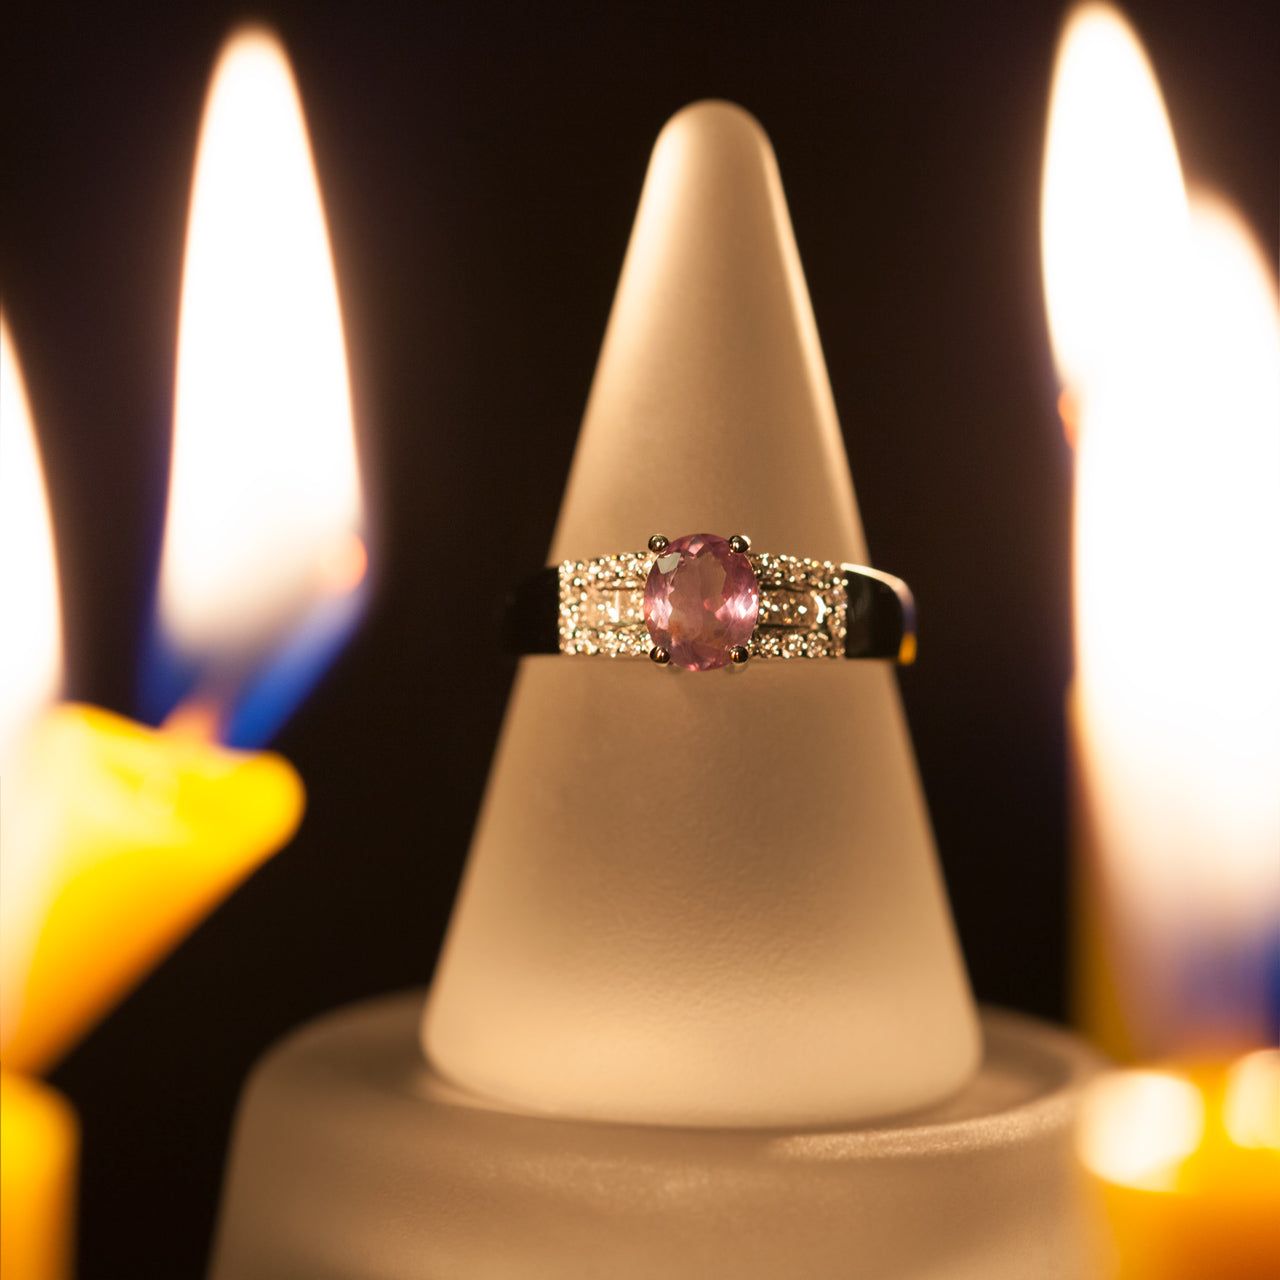 18k white gold ring with a 1.22ct alexandrite that appears pink in color, displayed on a candle